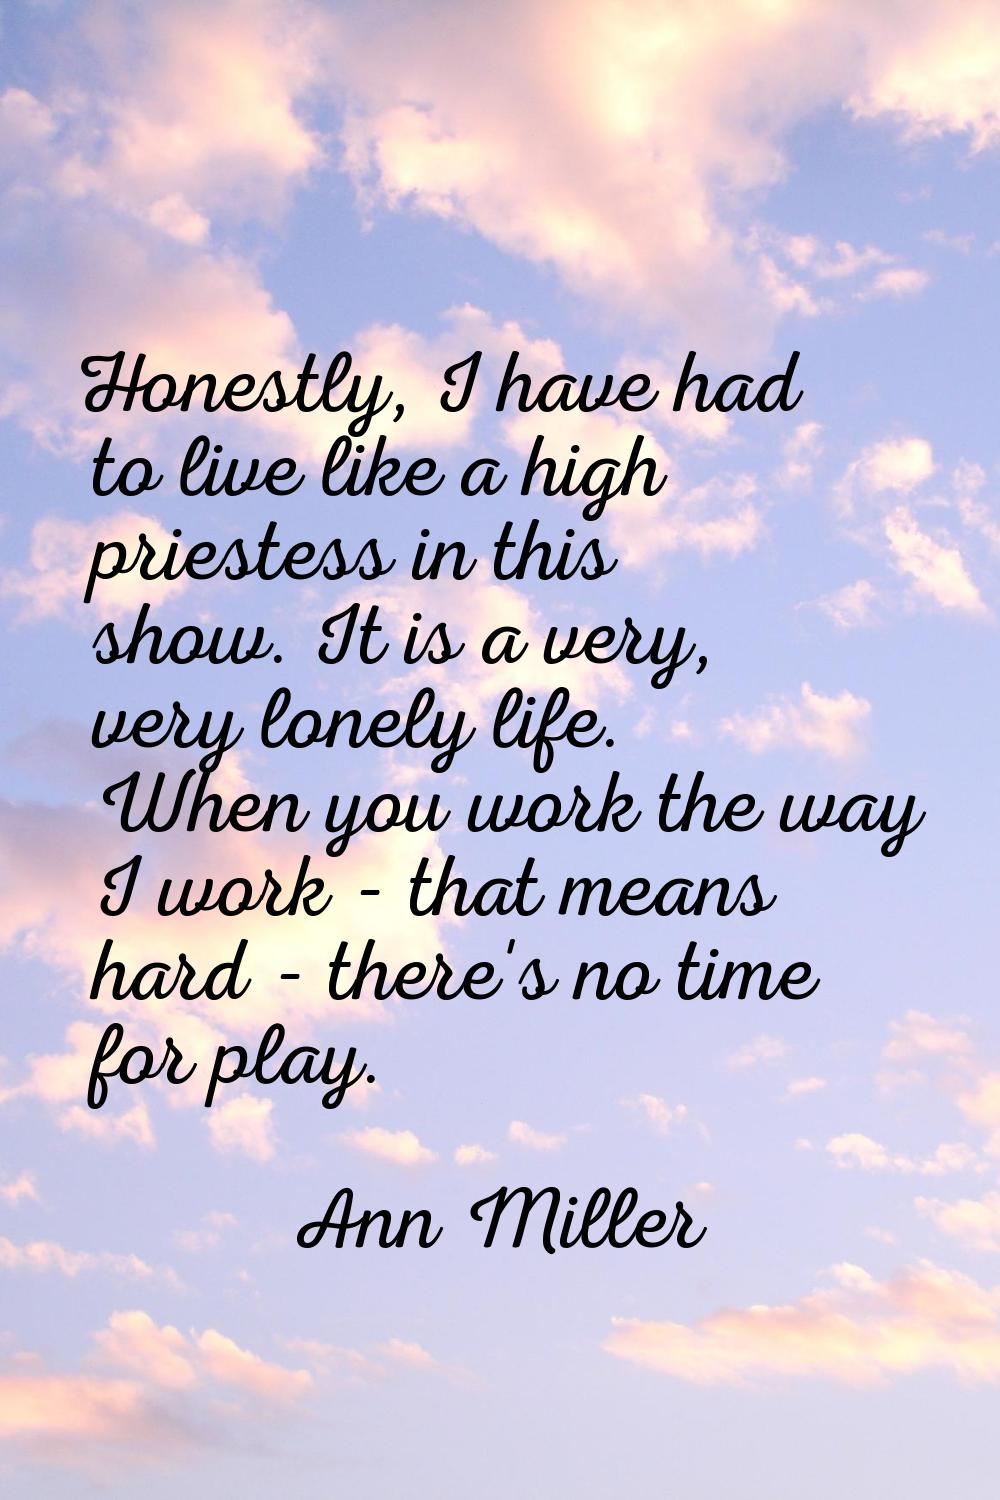 Honestly, I have had to live like a high priestess in this show. It is a very, very lonely life. Wh